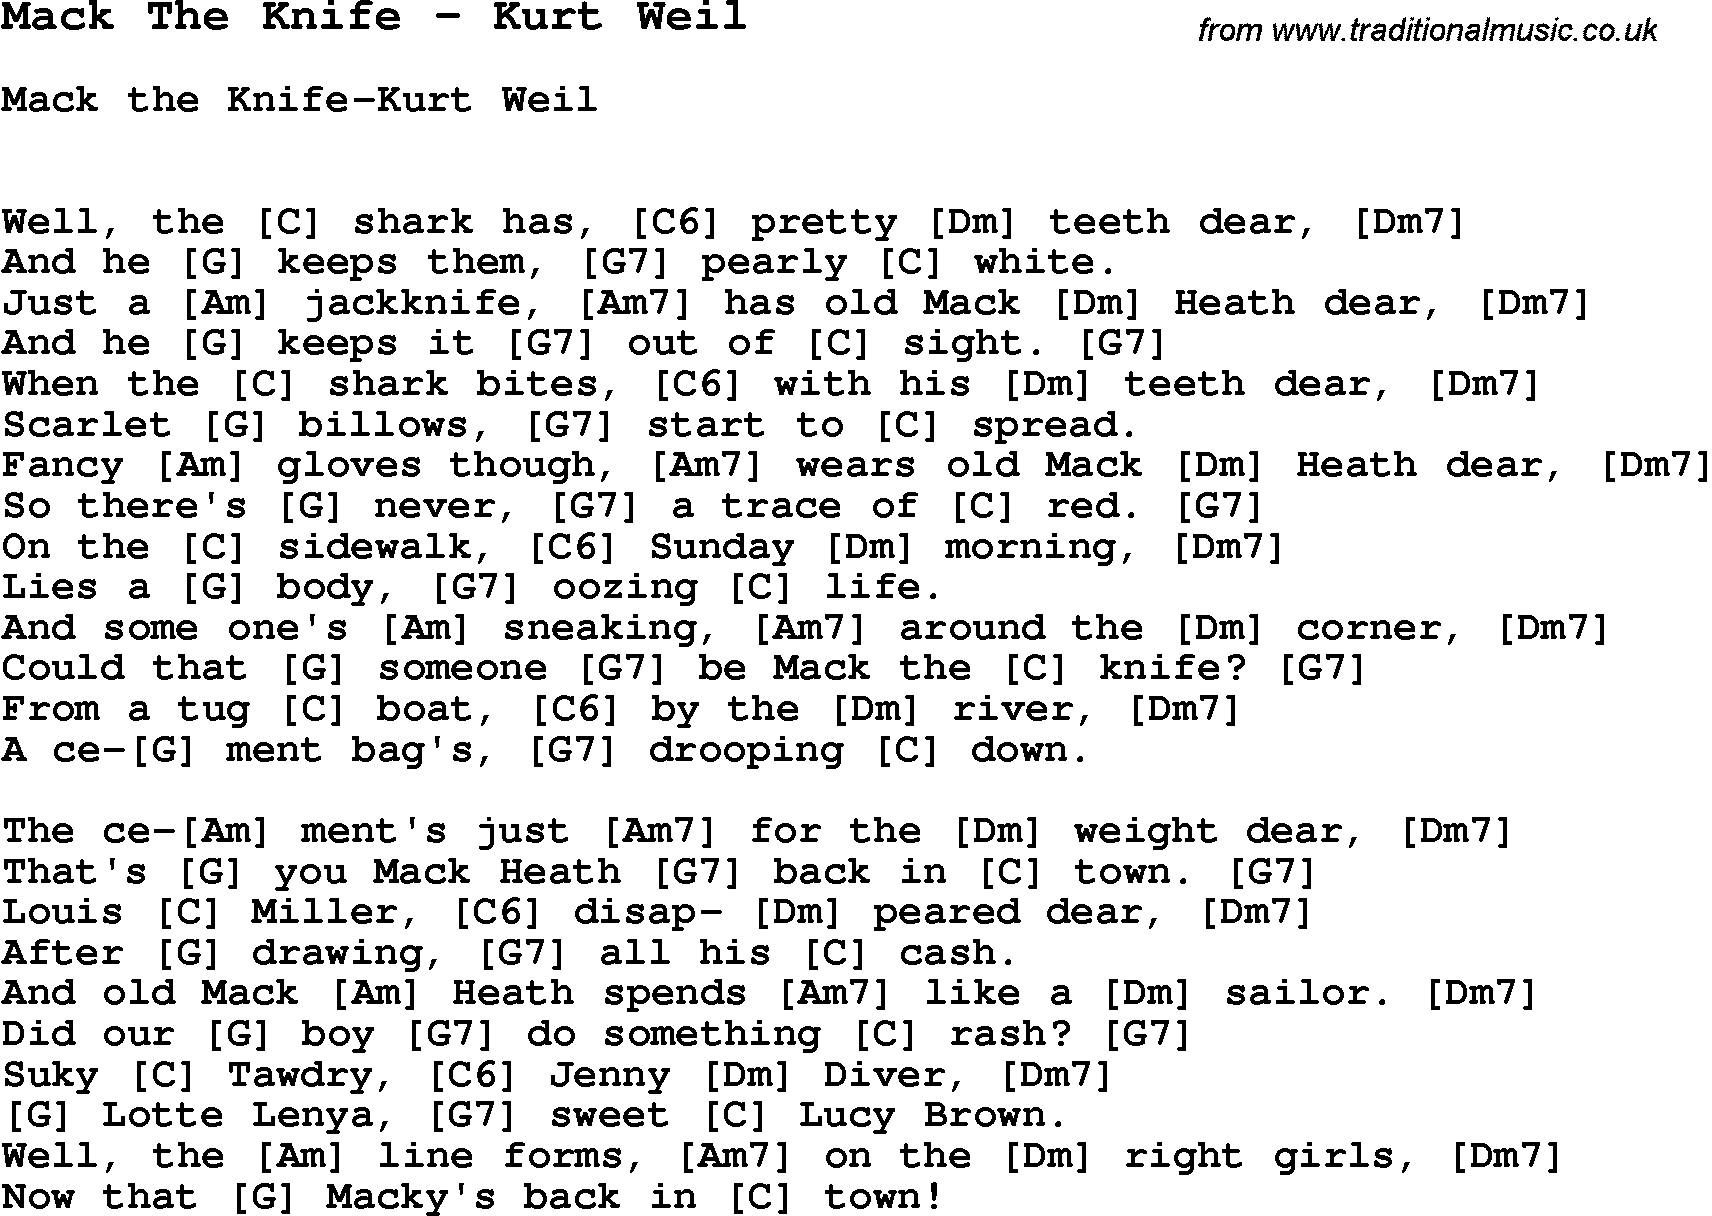 Song Mack The Knife by Kurt Weil, with lyrics for vocal performance and accompaniment chords for Ukulele, Guitar Banjo etc.